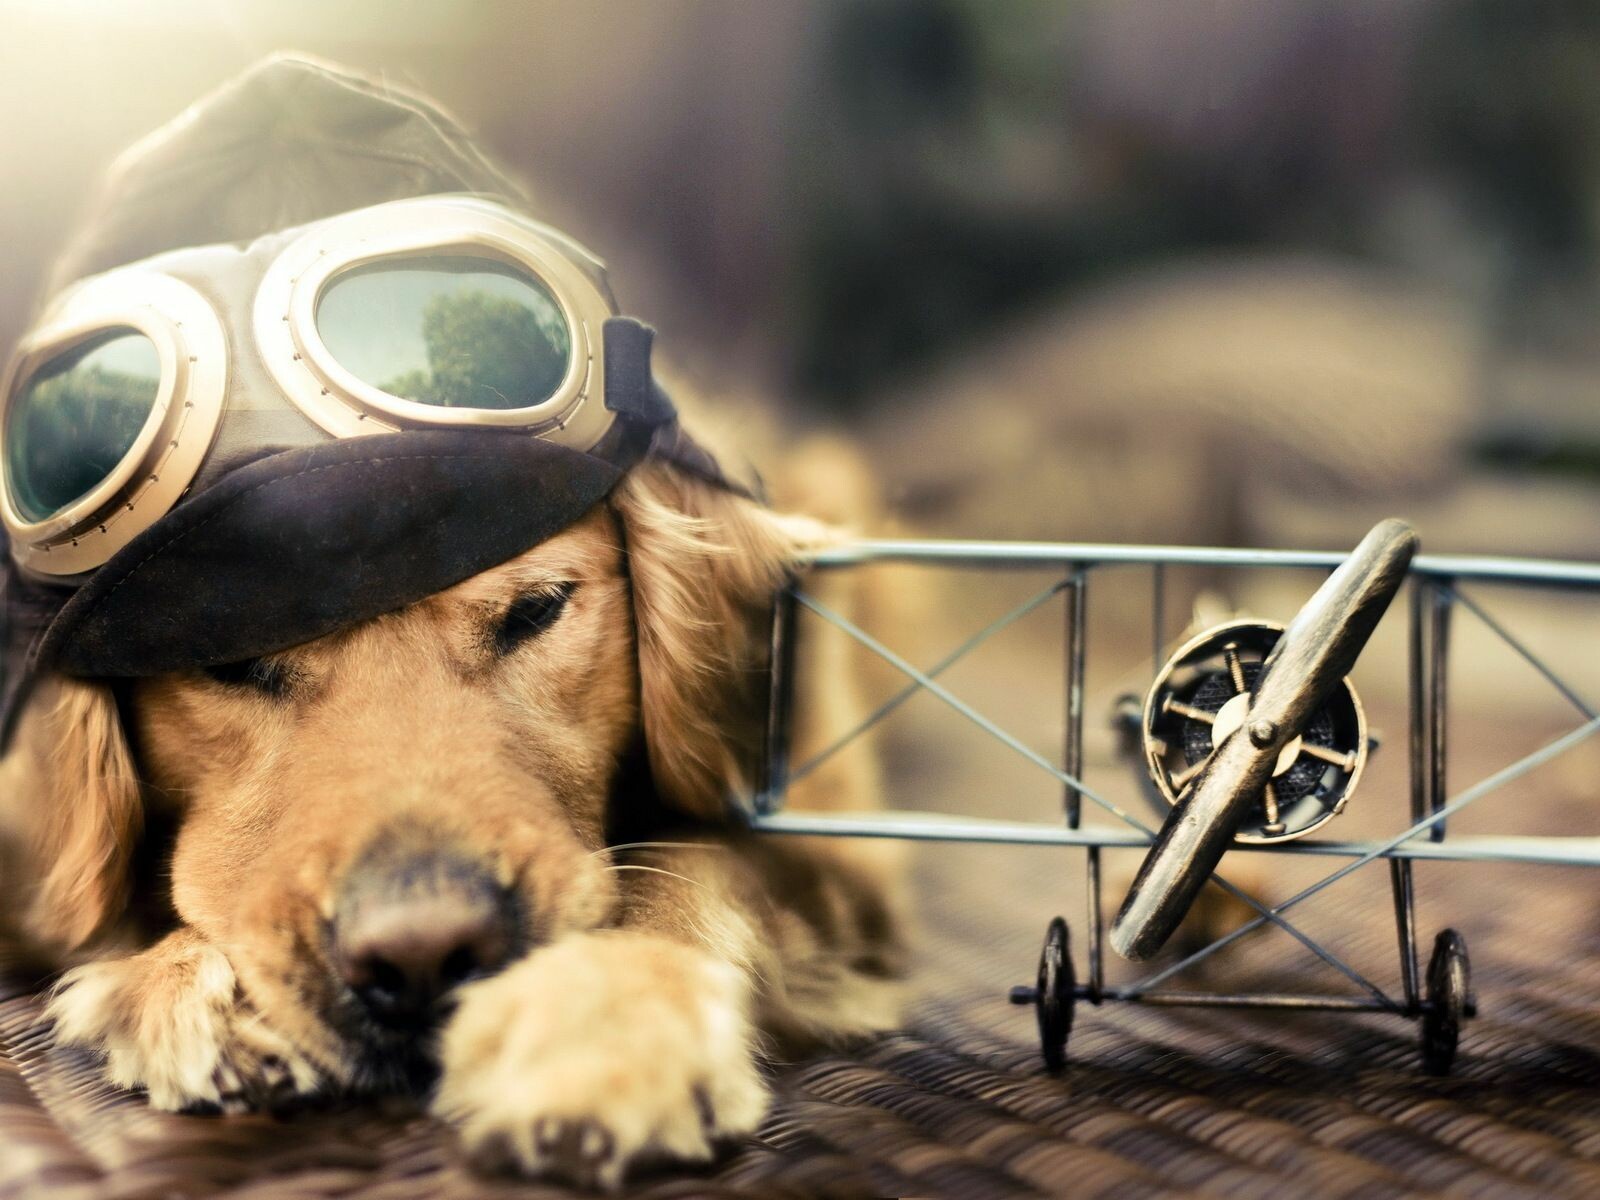 49+ Funny Dog Wallpapers: HD, 4K, 5K